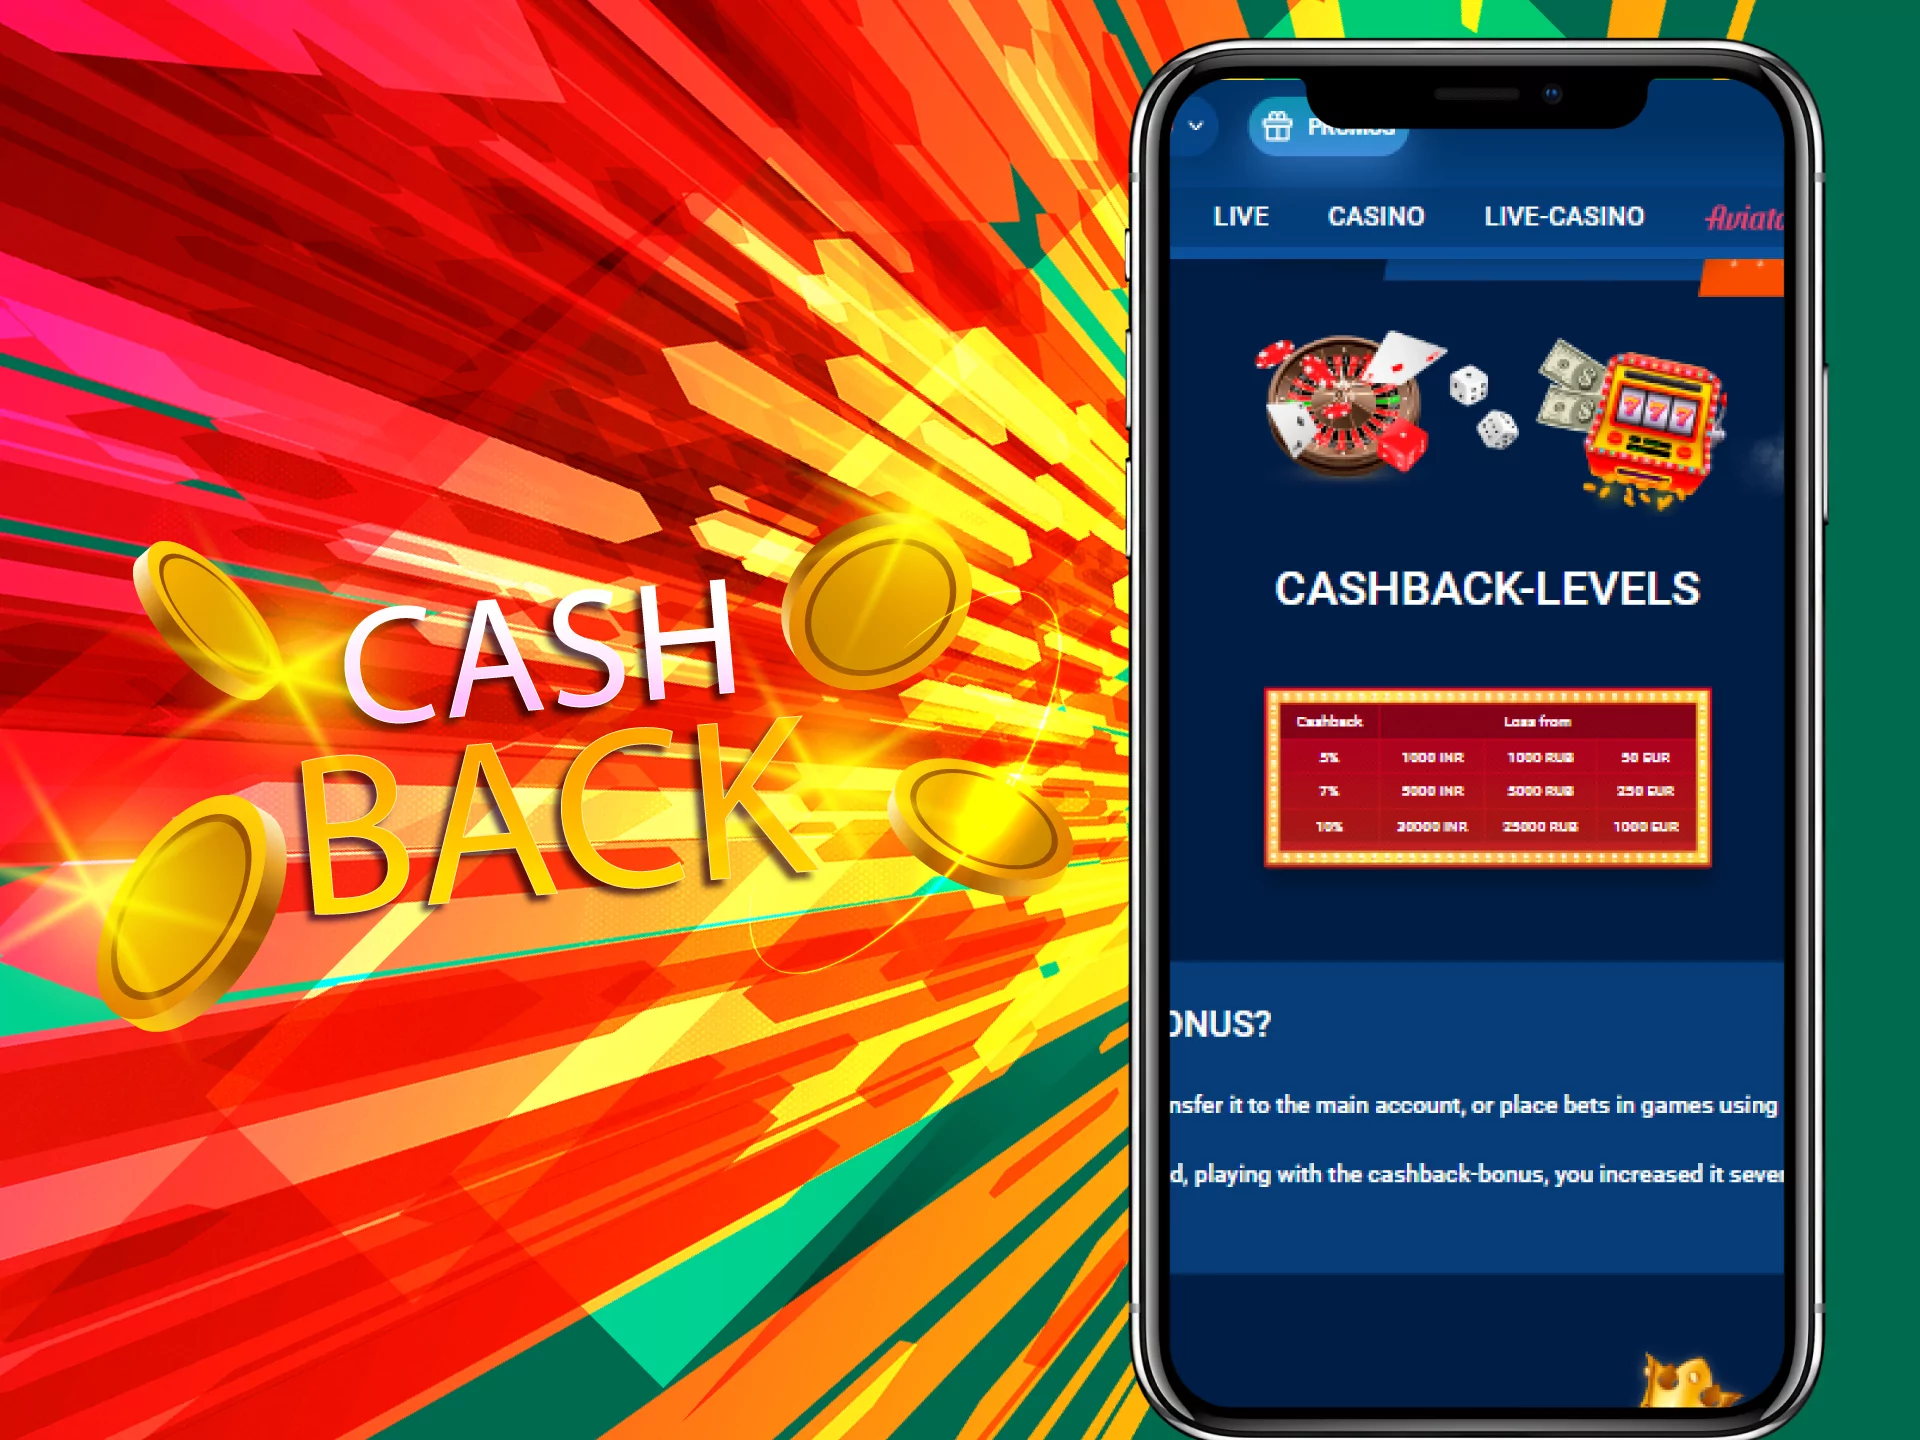 Receive 10% of your lost money as a cashback from Mostbet.